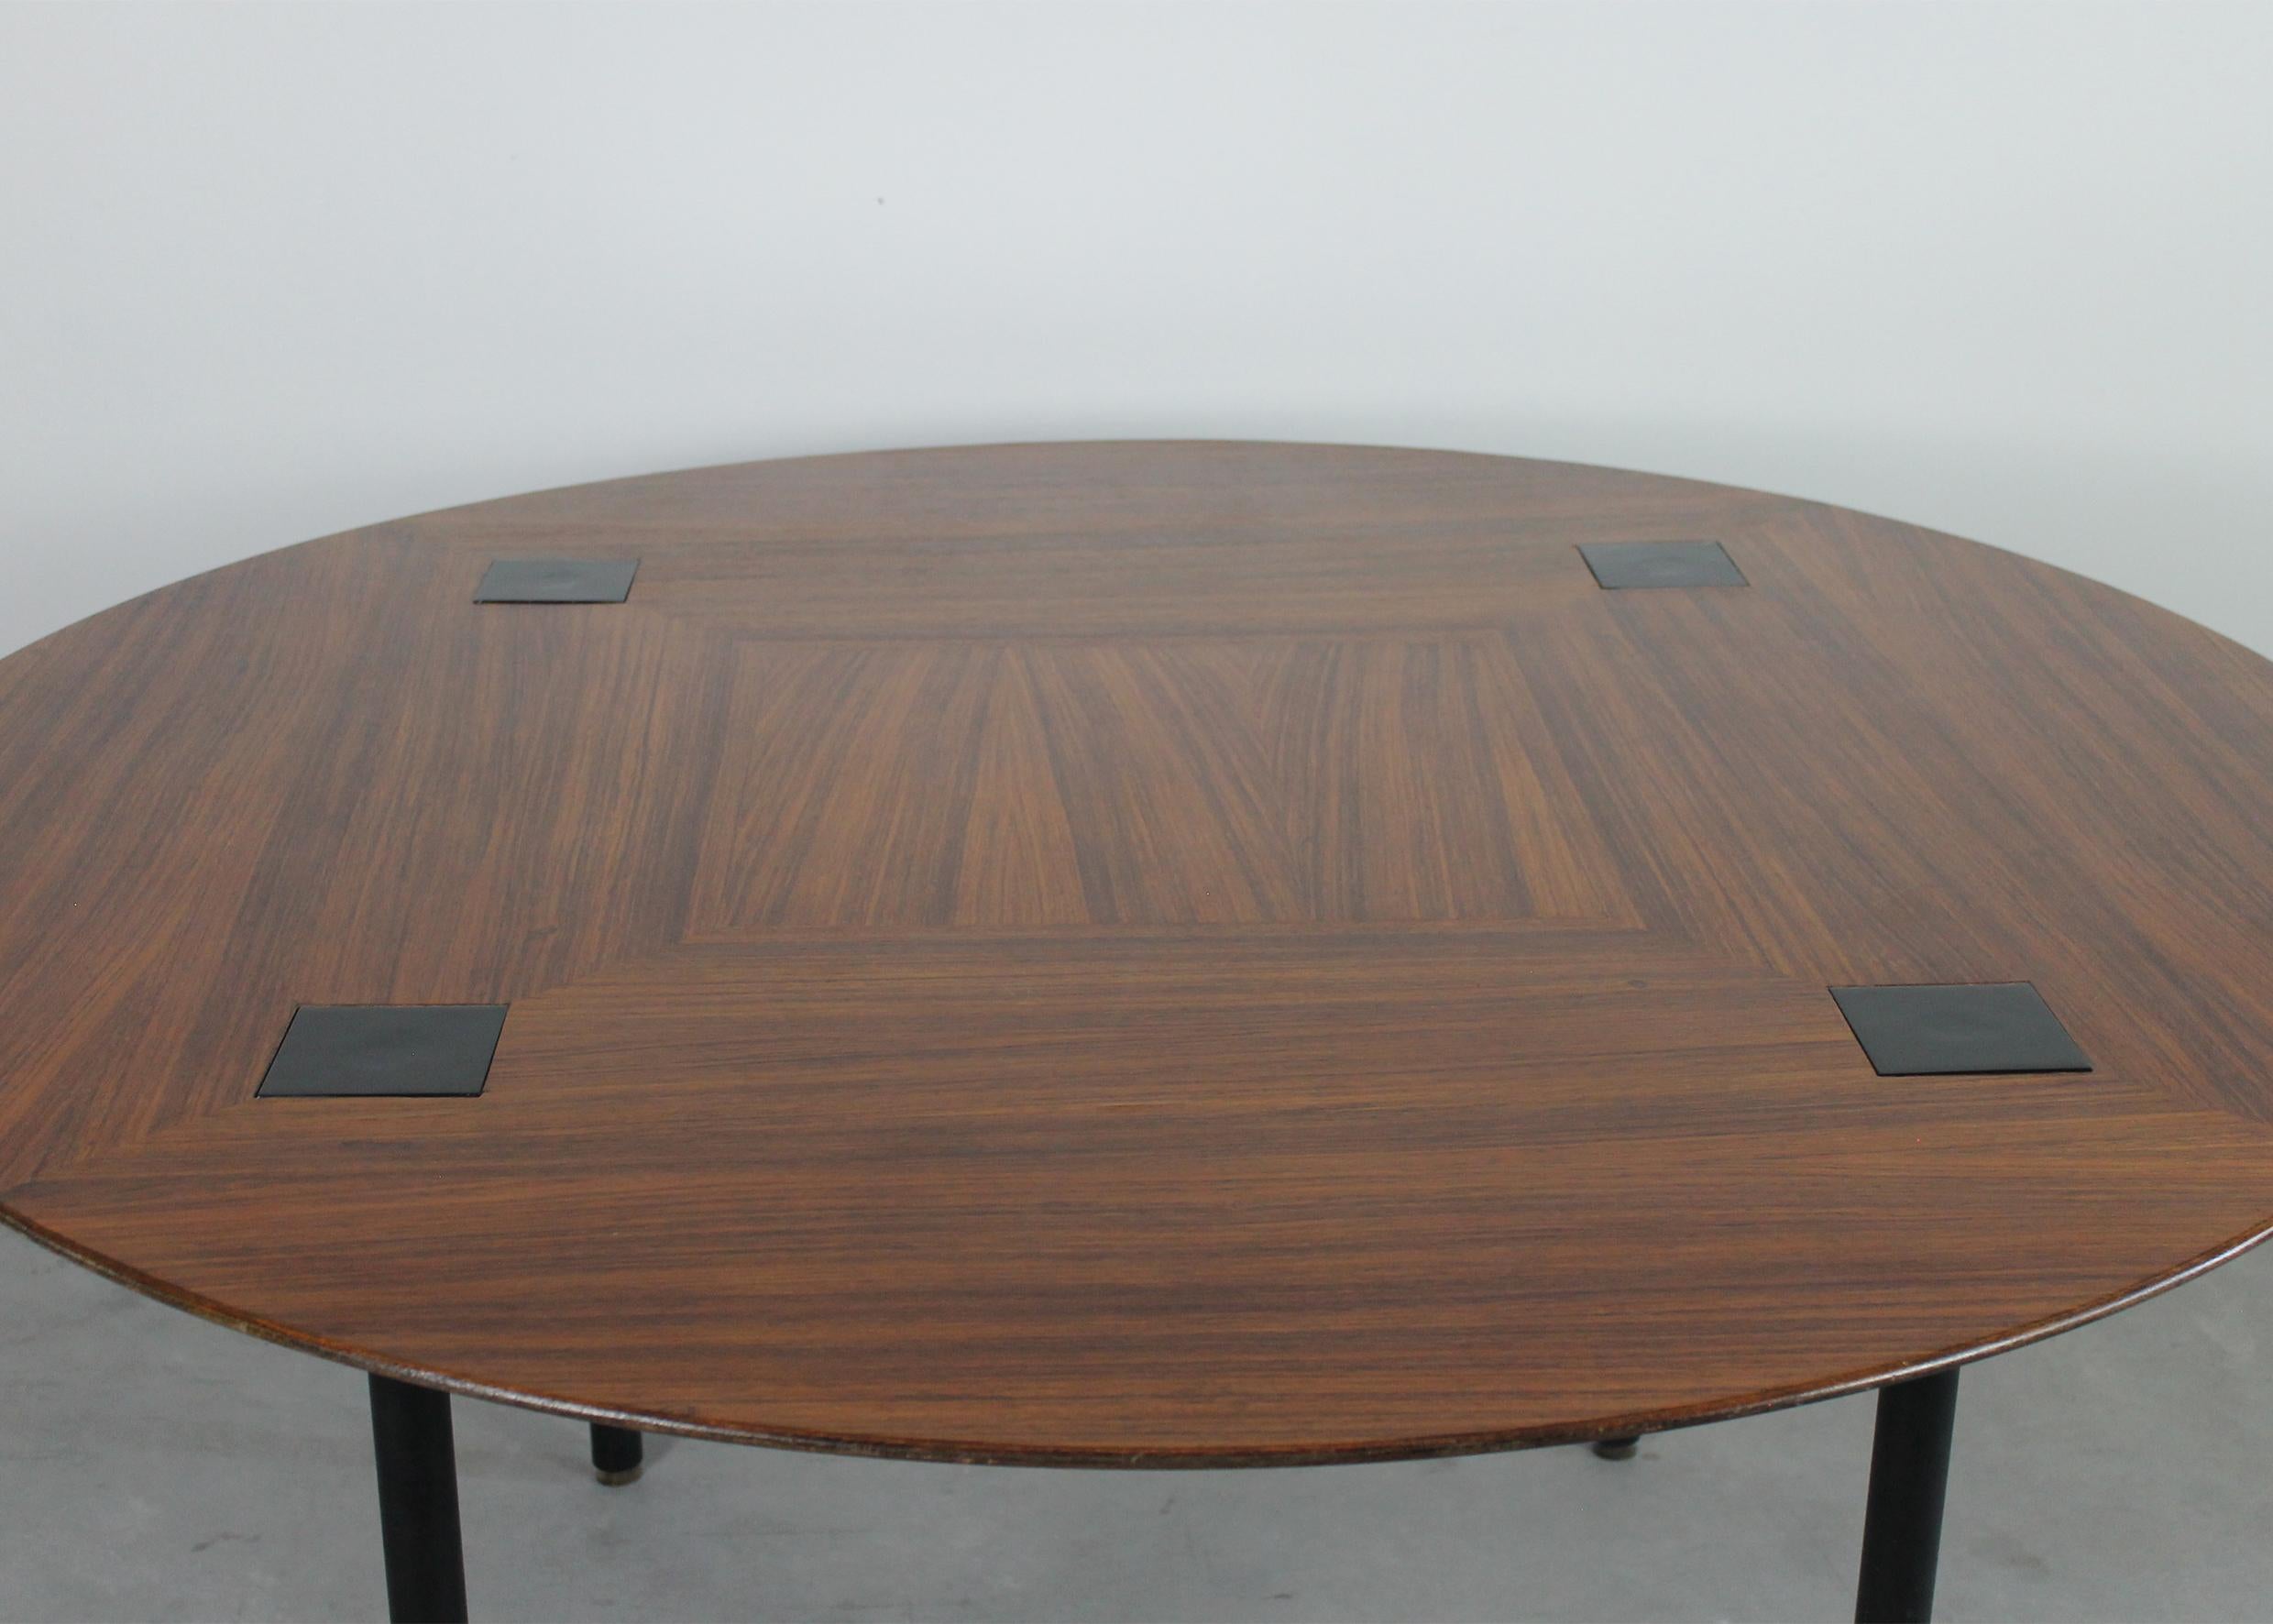 Lacquered Ettore Sottsass T72 Round Table in Wood and Brass by Poltronova 1950s For Sale